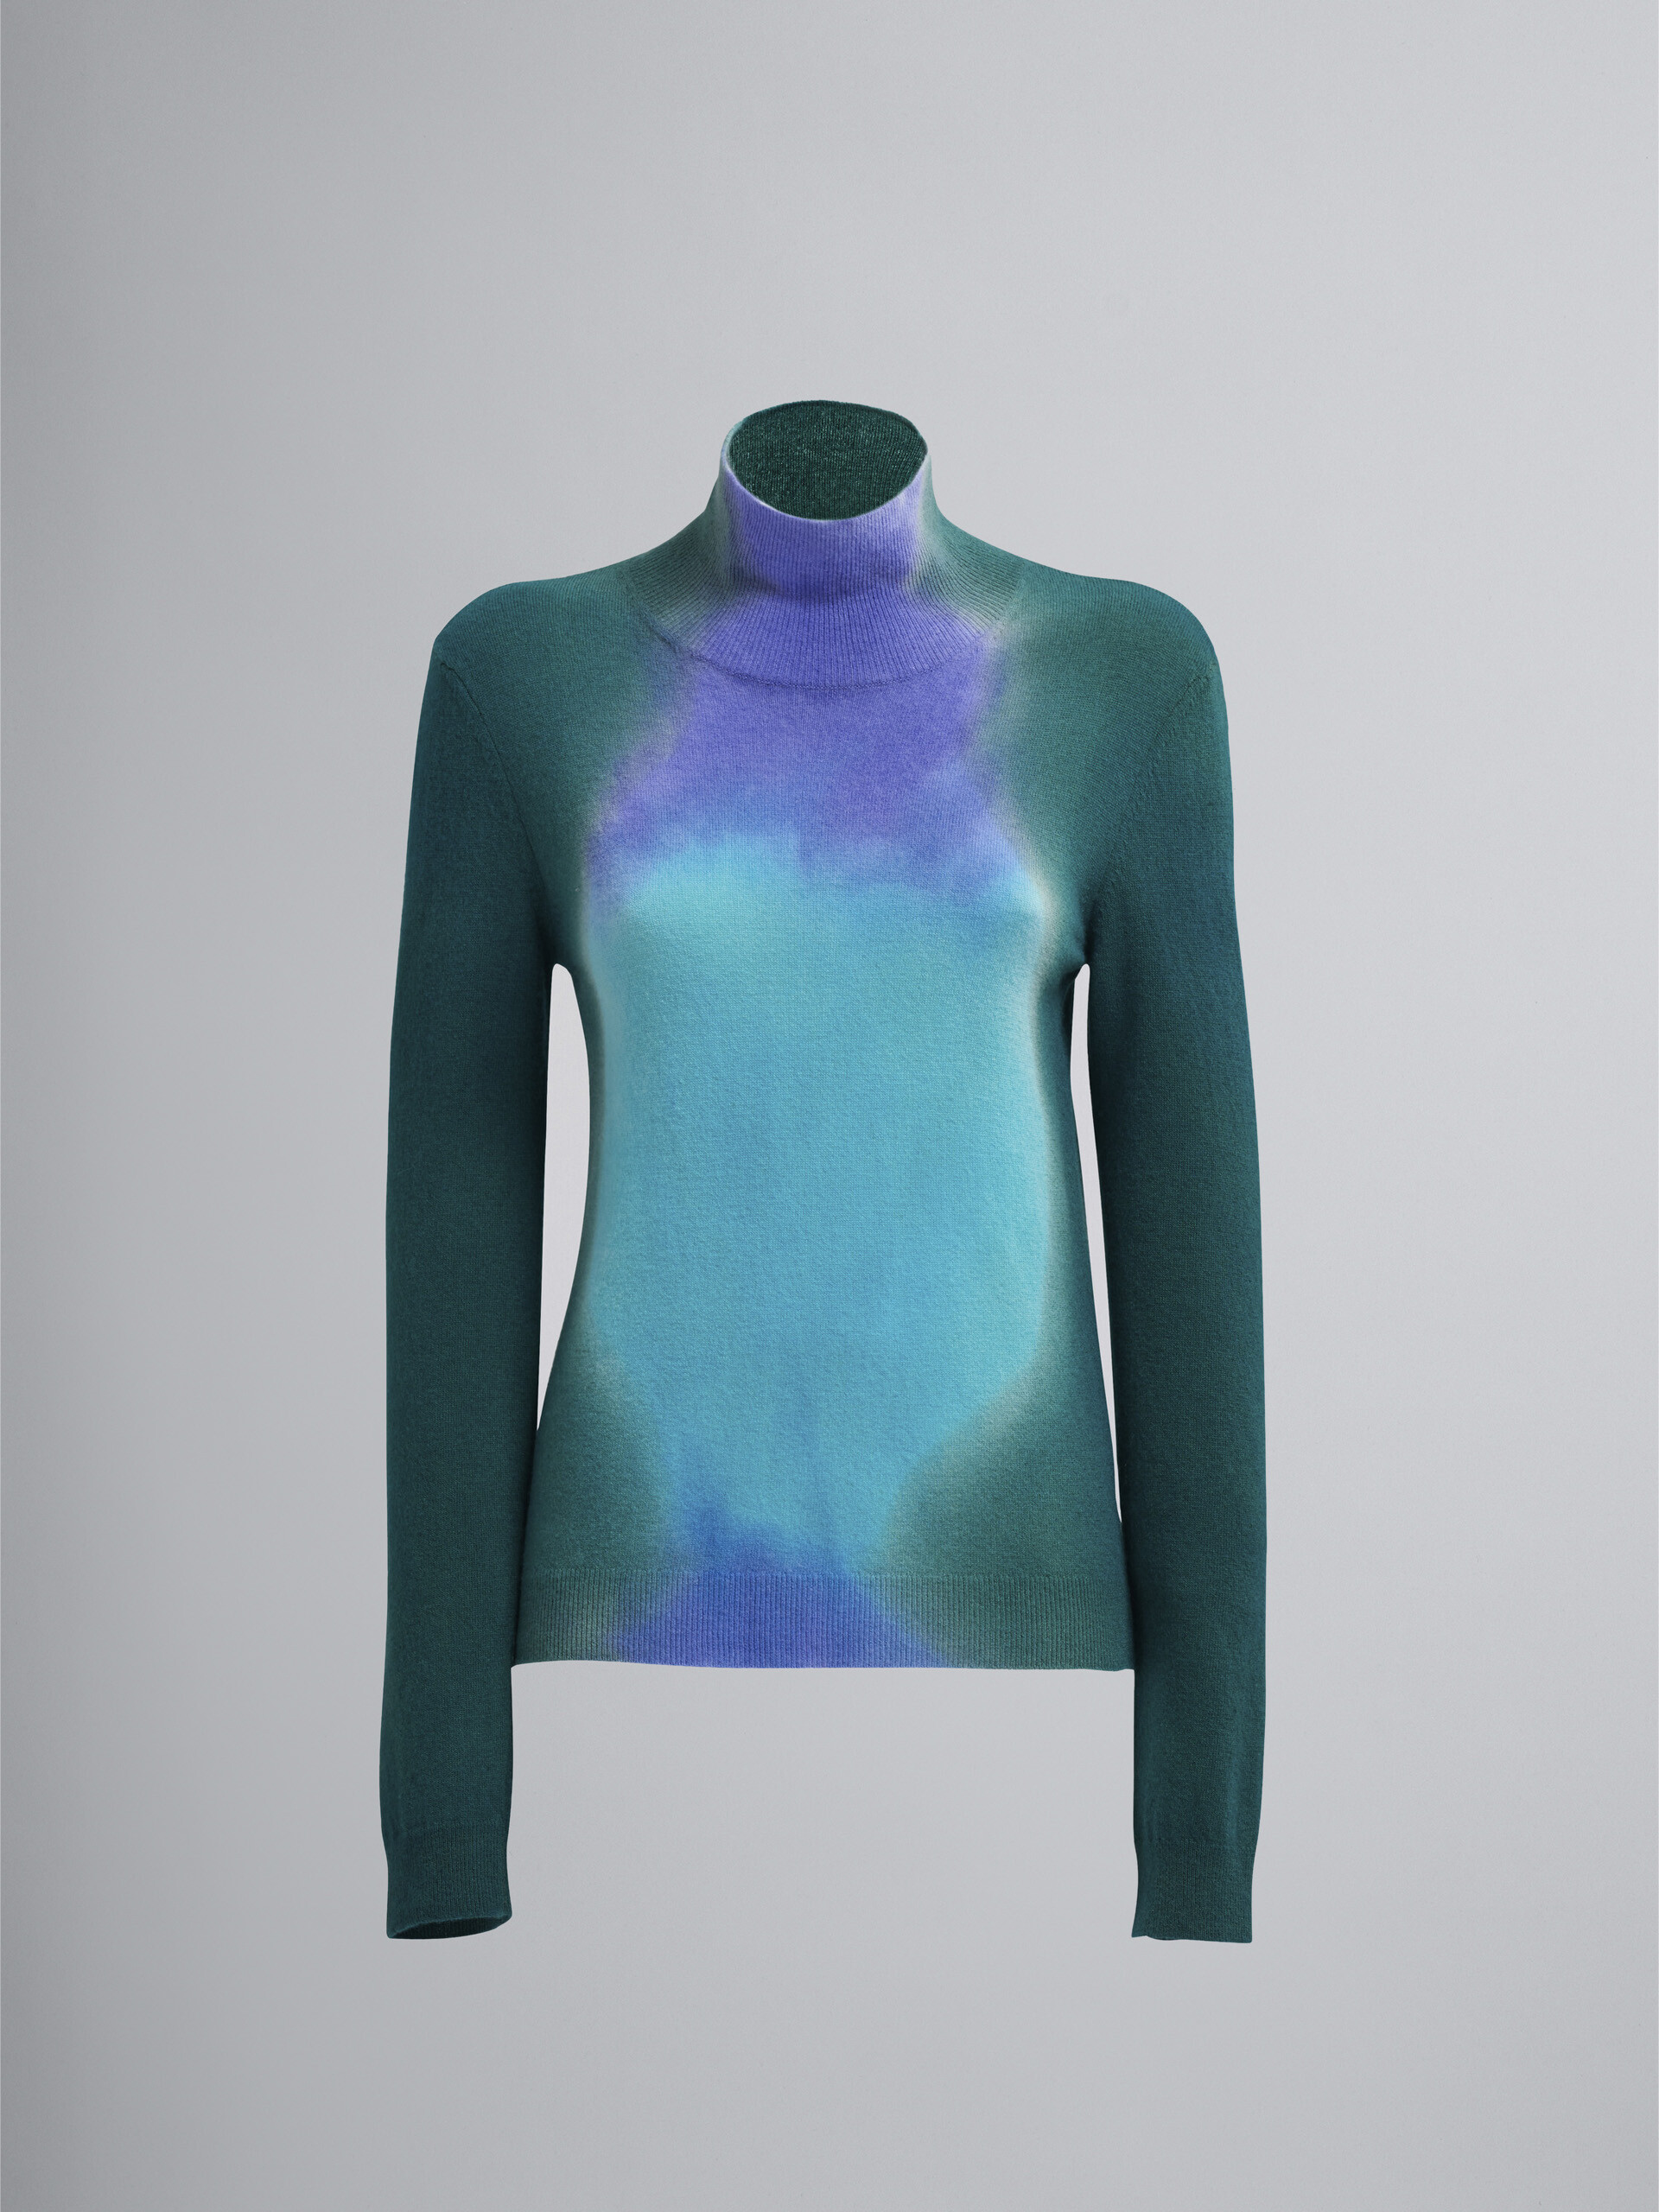 Hand-dyed virgin wool sweater - Pullovers - Image 1